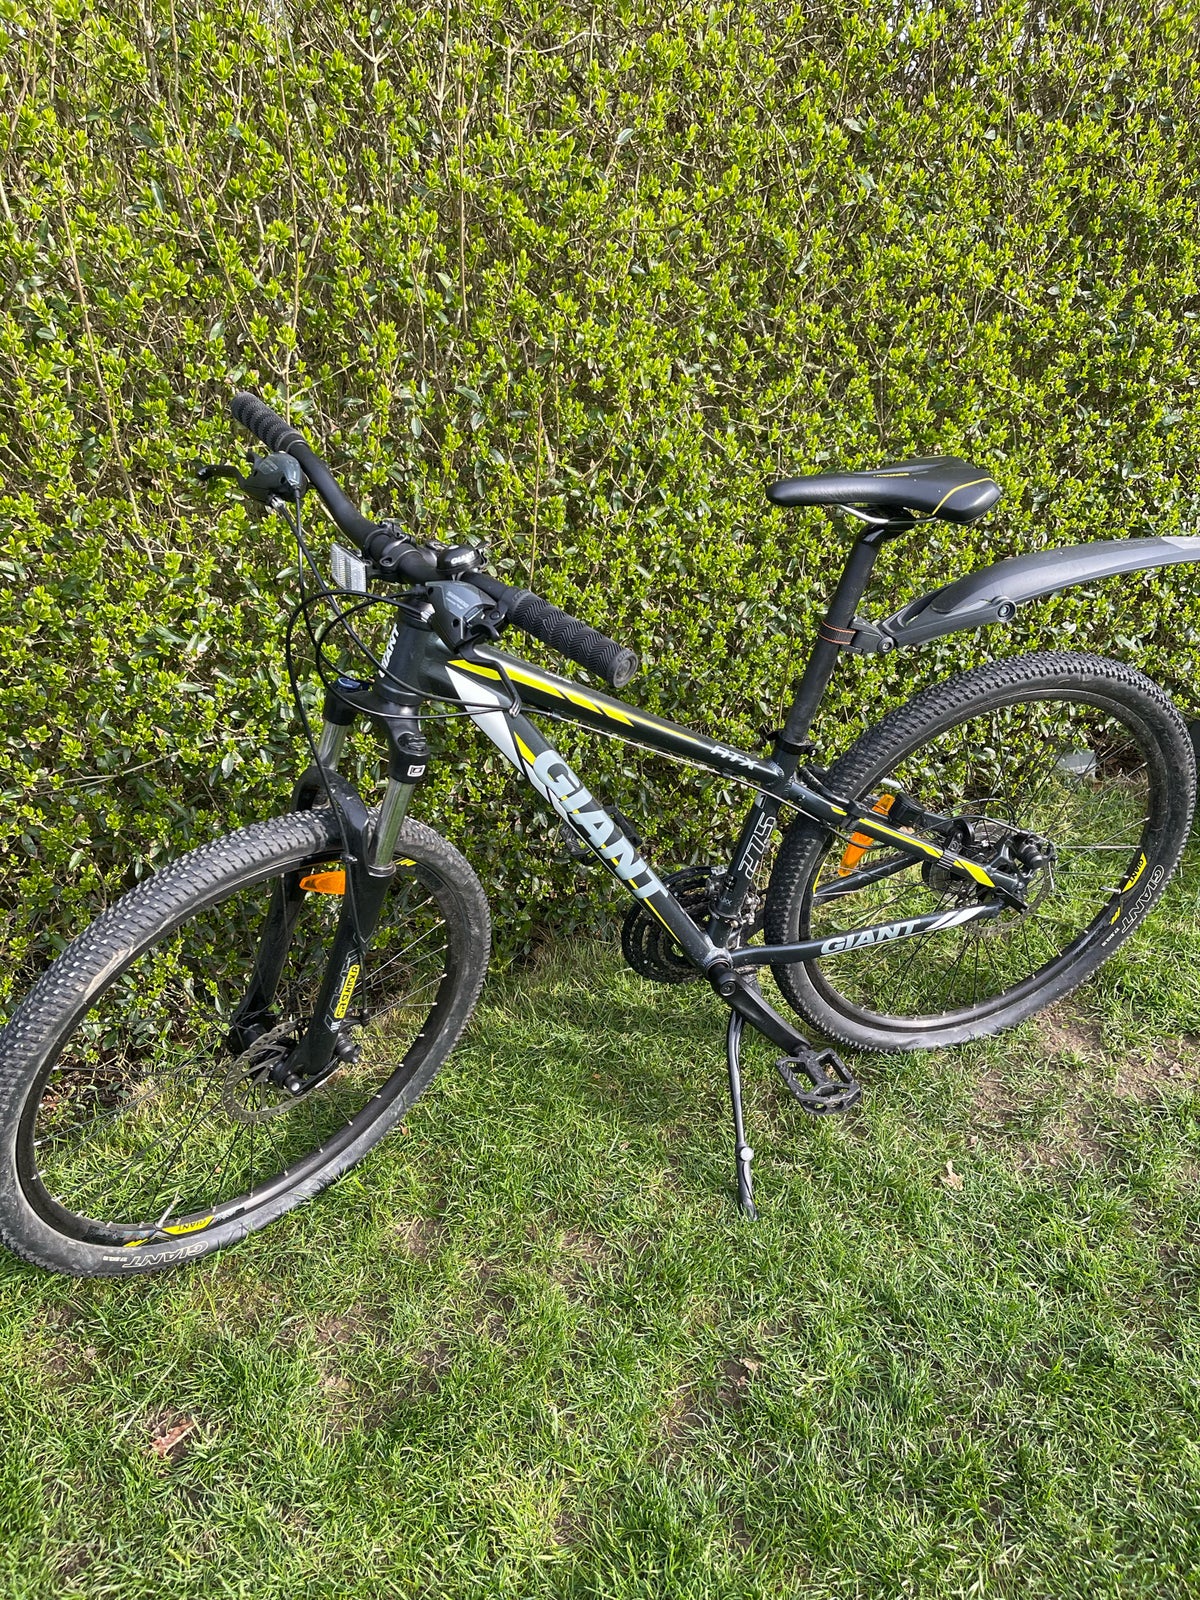 Giant Giant ATX, anden mountainbike, 13 tommer